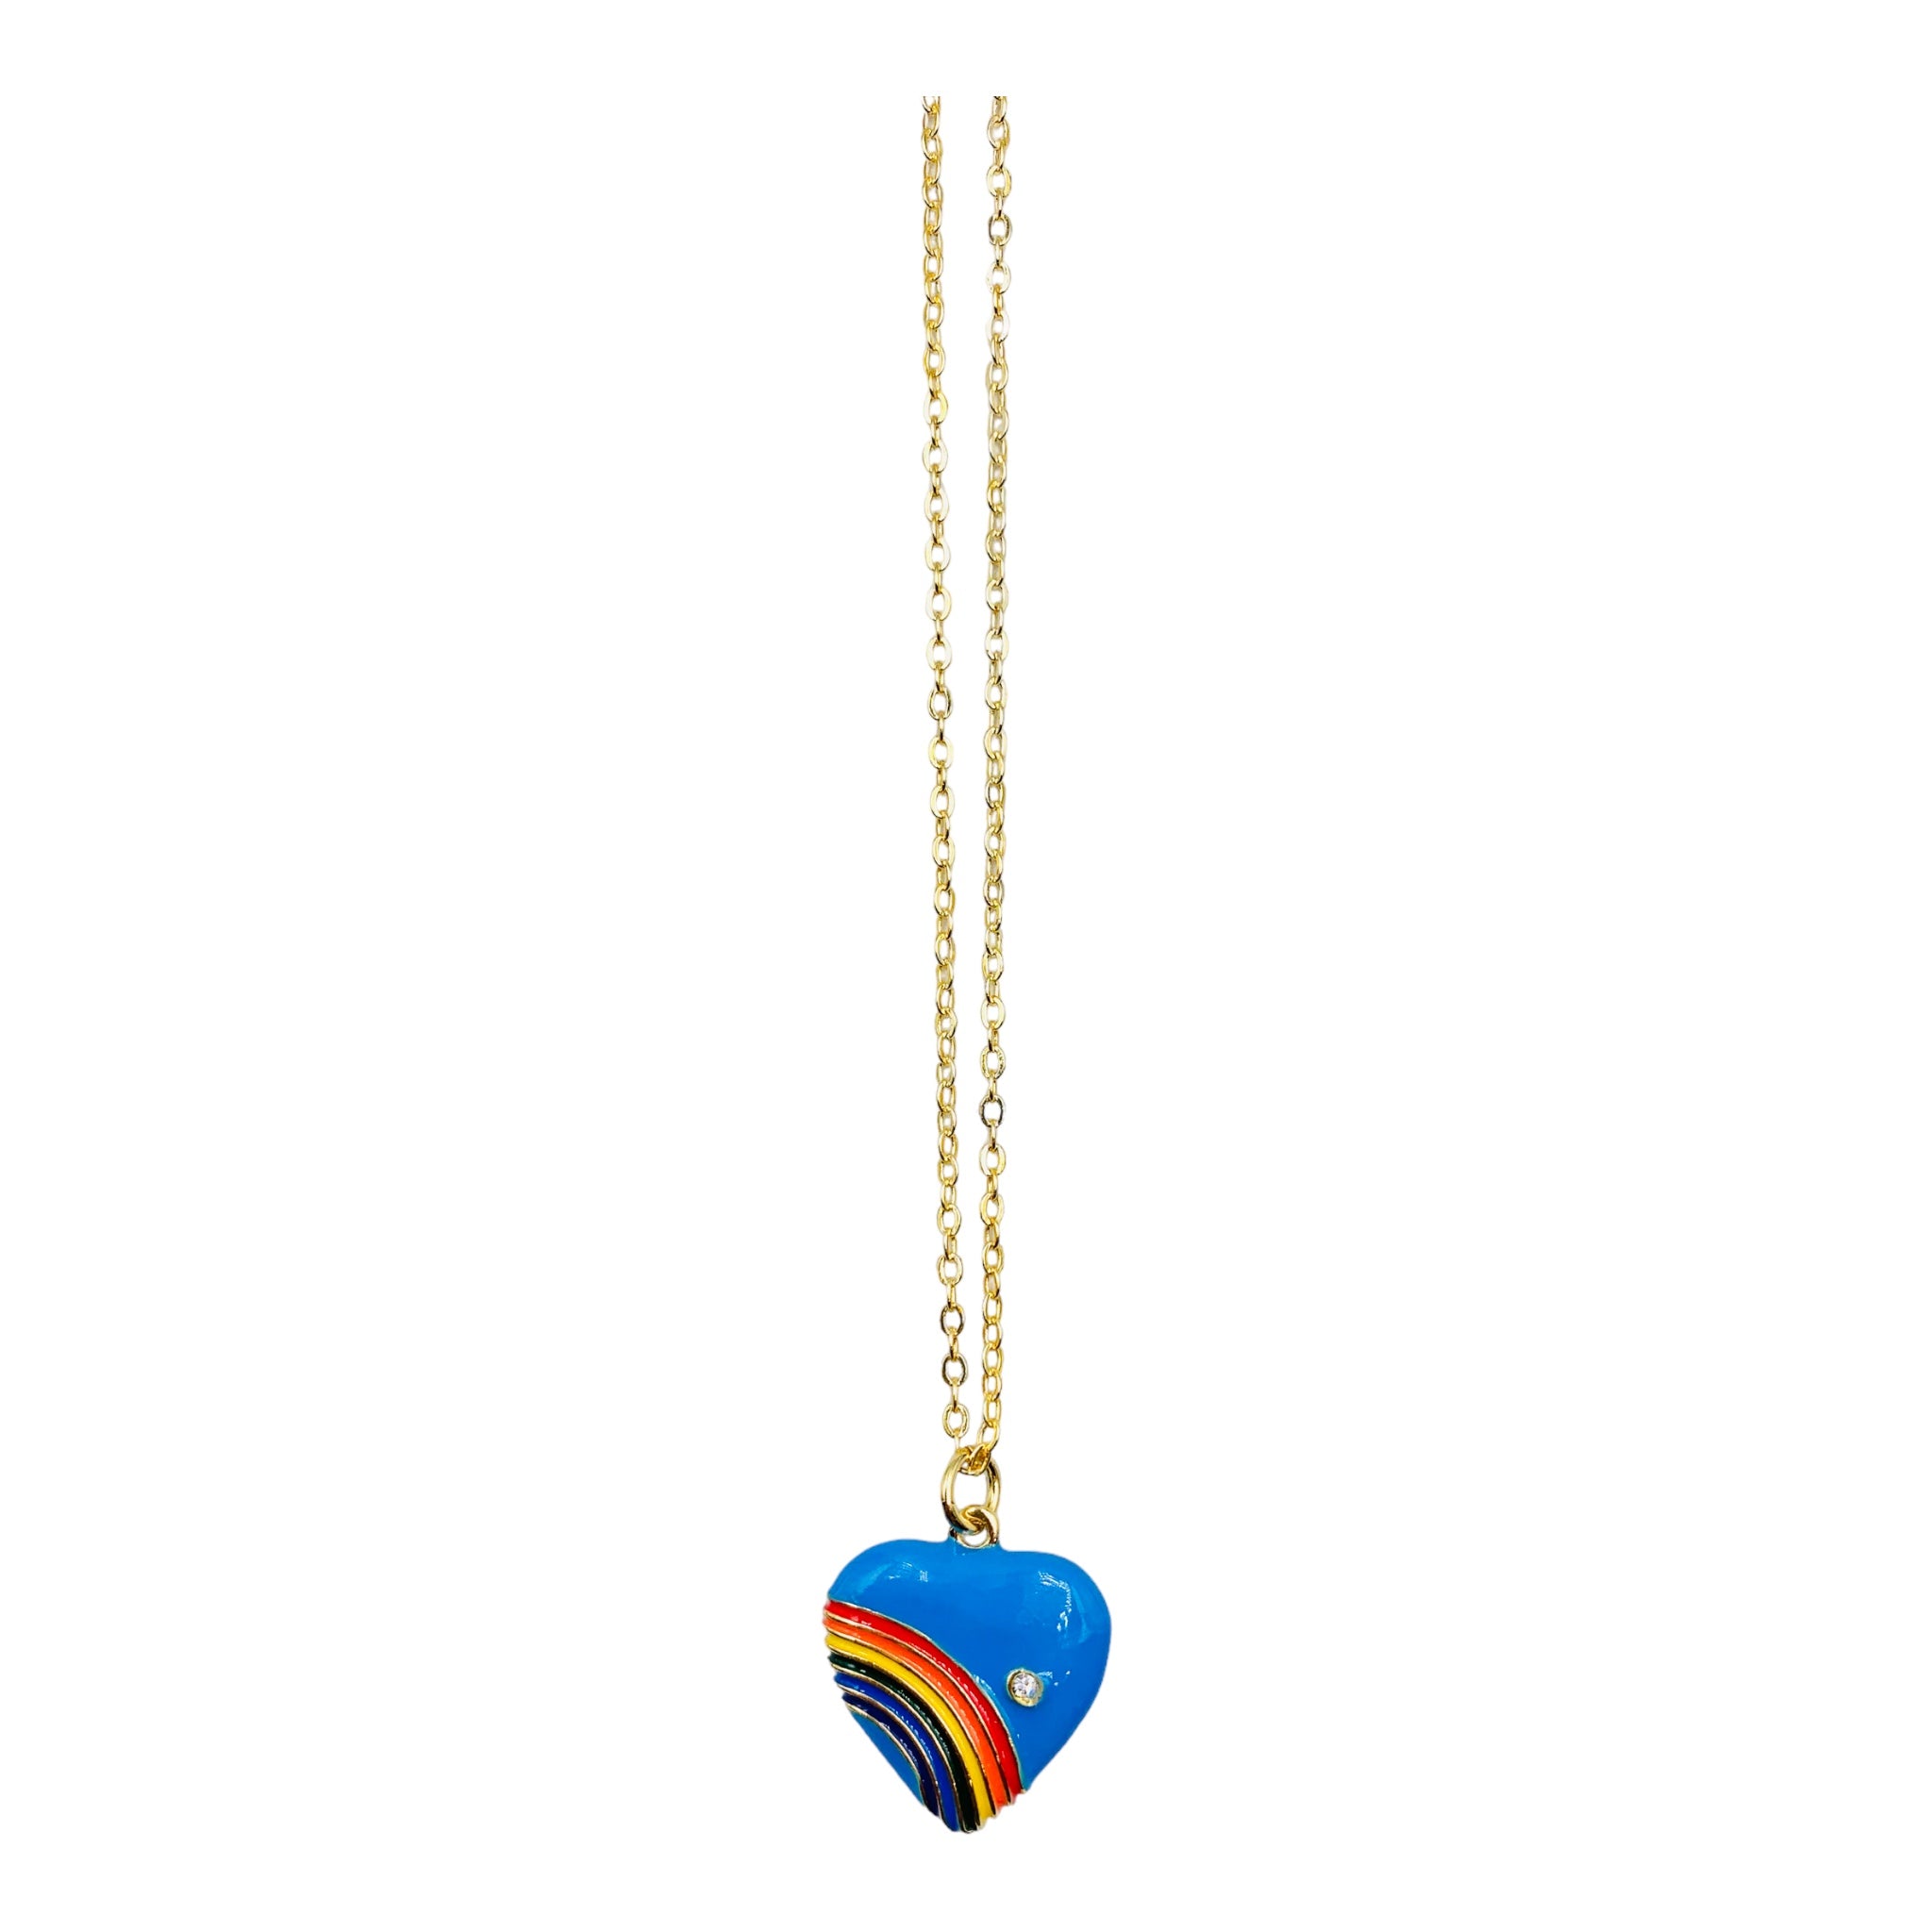 NECKLACE HEARTLOVE PARADISE